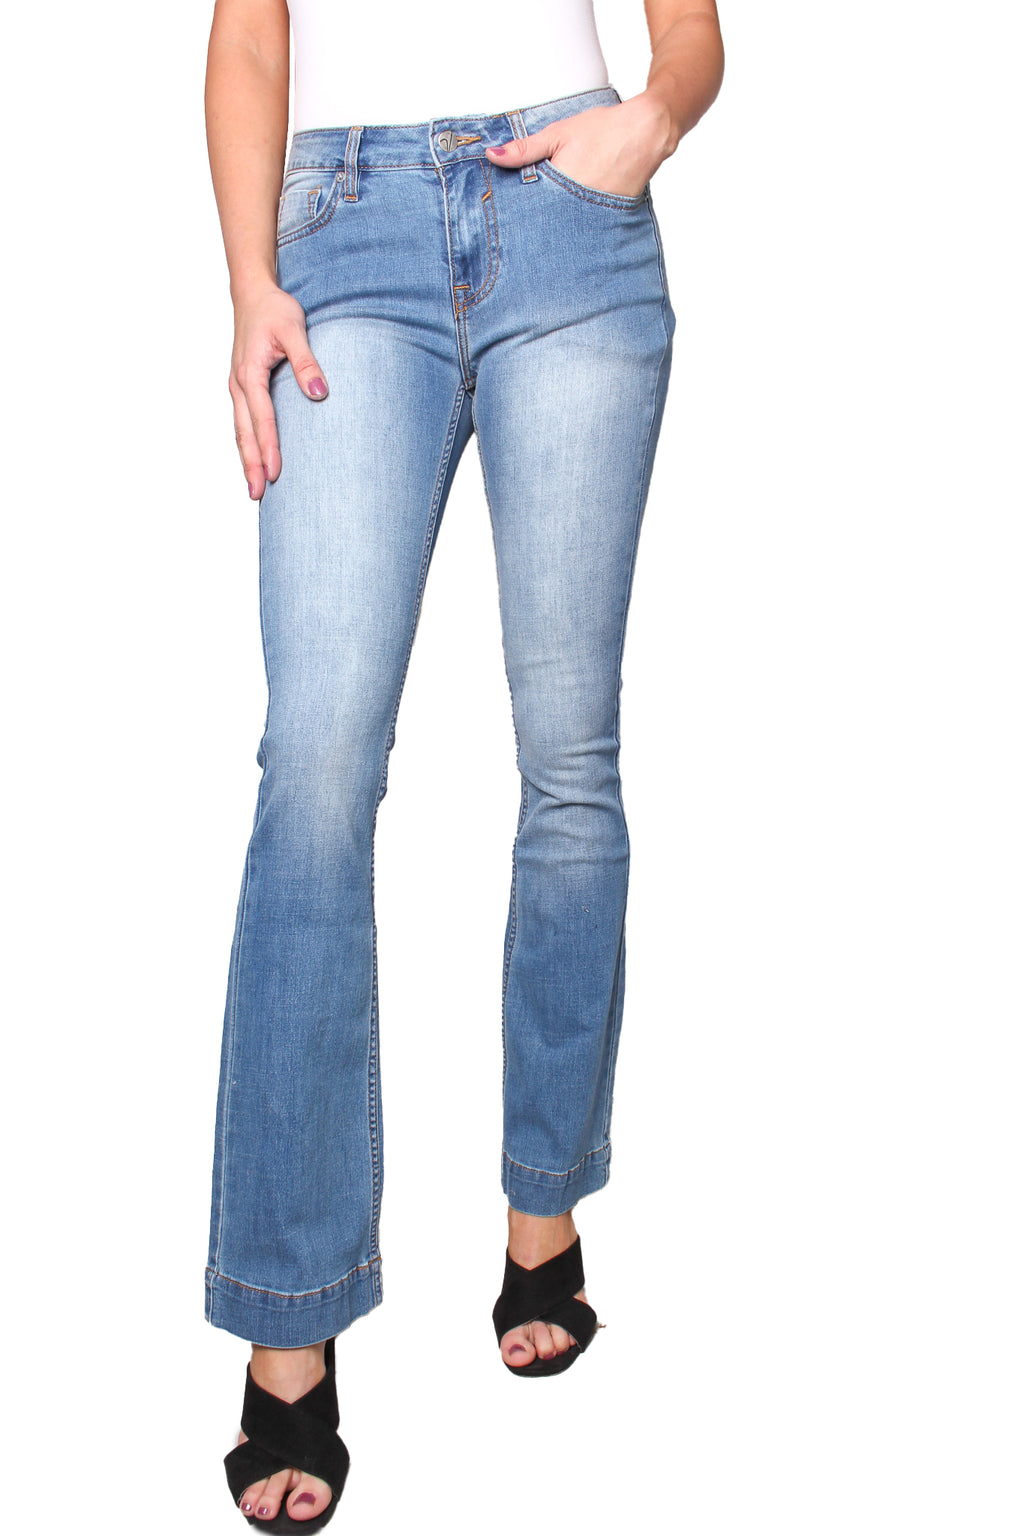 Women's High Waisted Faded Flared Bottom Jeans